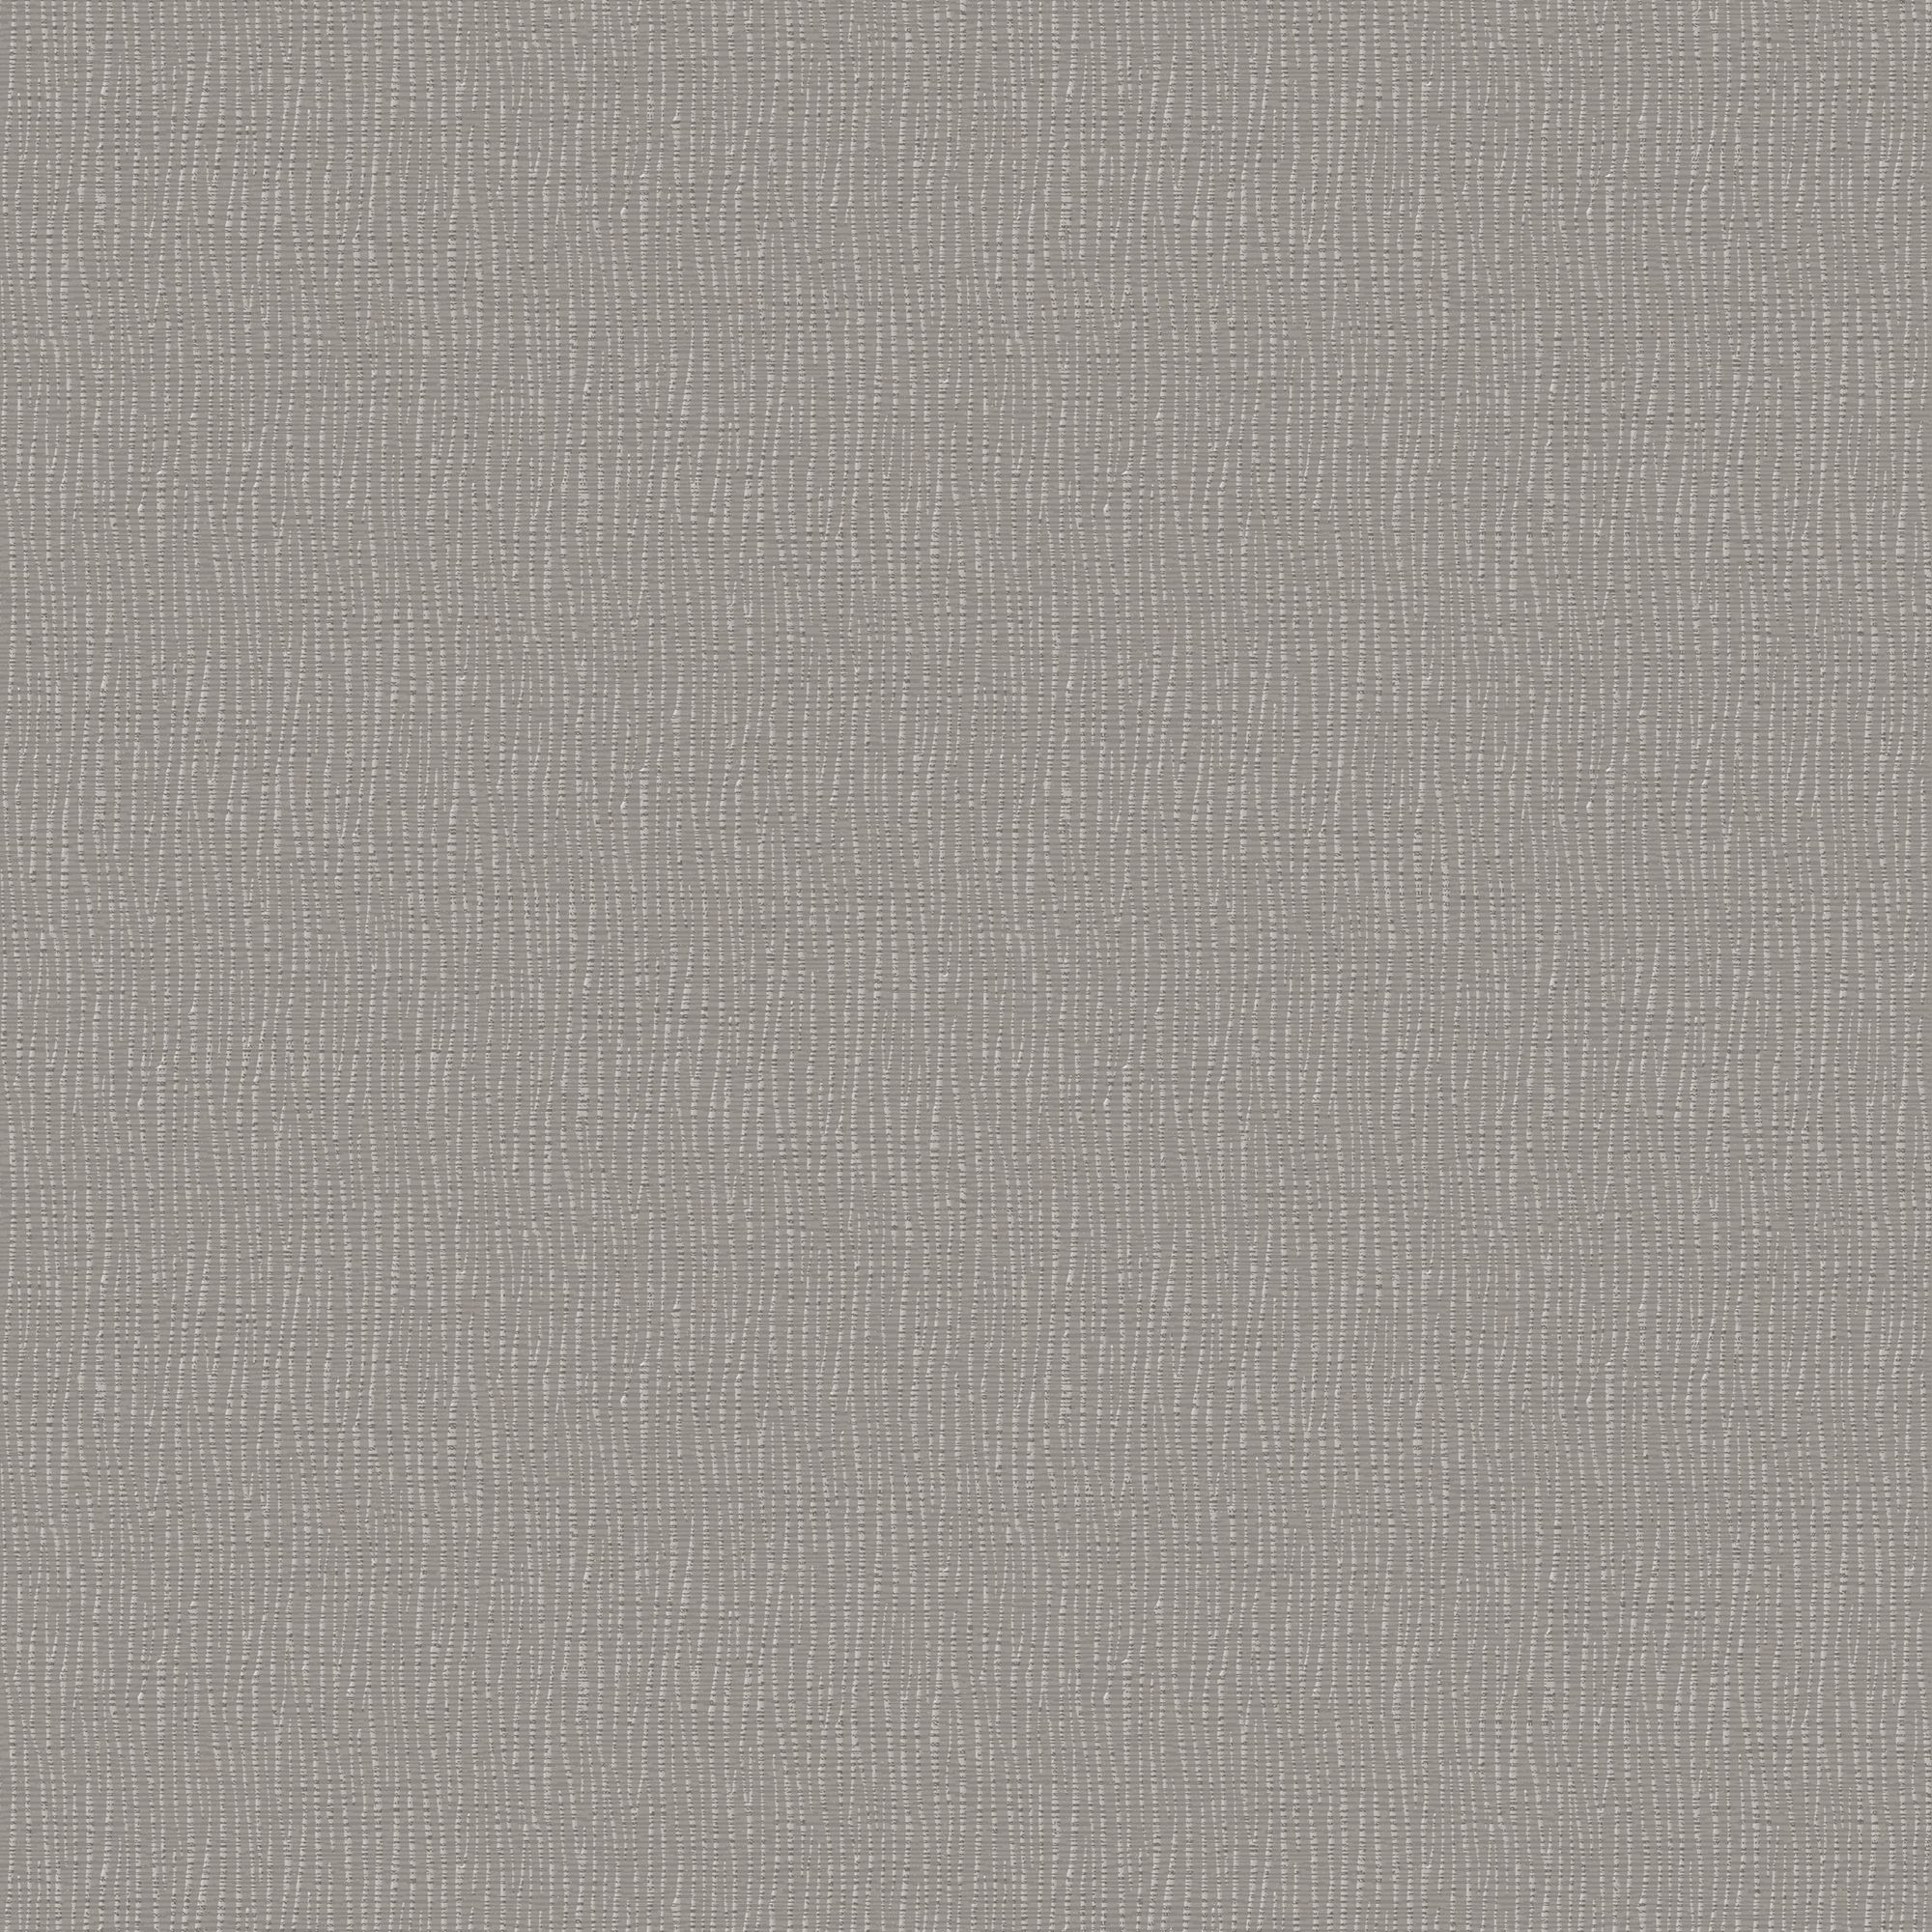 Boutique Shimmer Taupe Metallic & glitter effect Wave Textured Wallpaper